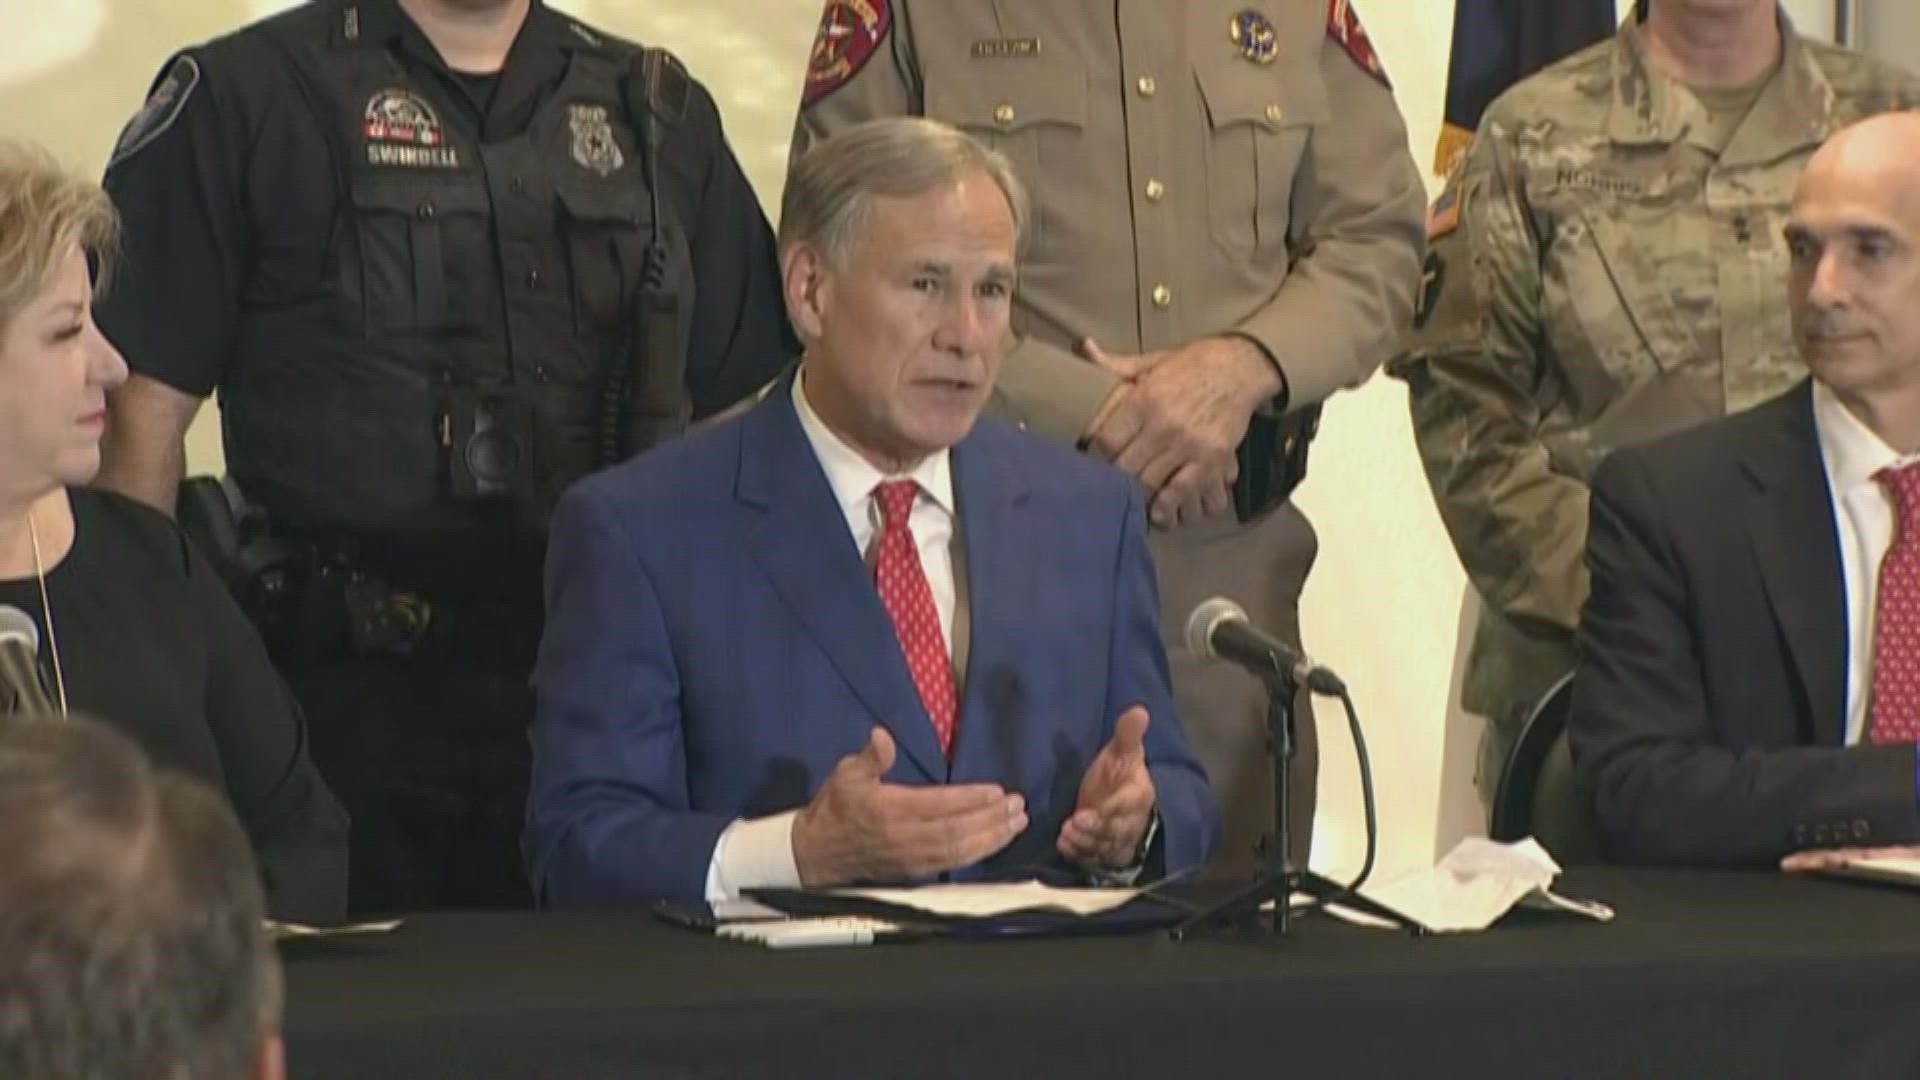 Texas Gov. Greg Abbott was in Fort Worth to sign House Bill 9, which provides $1.8 billion in funding for border security.